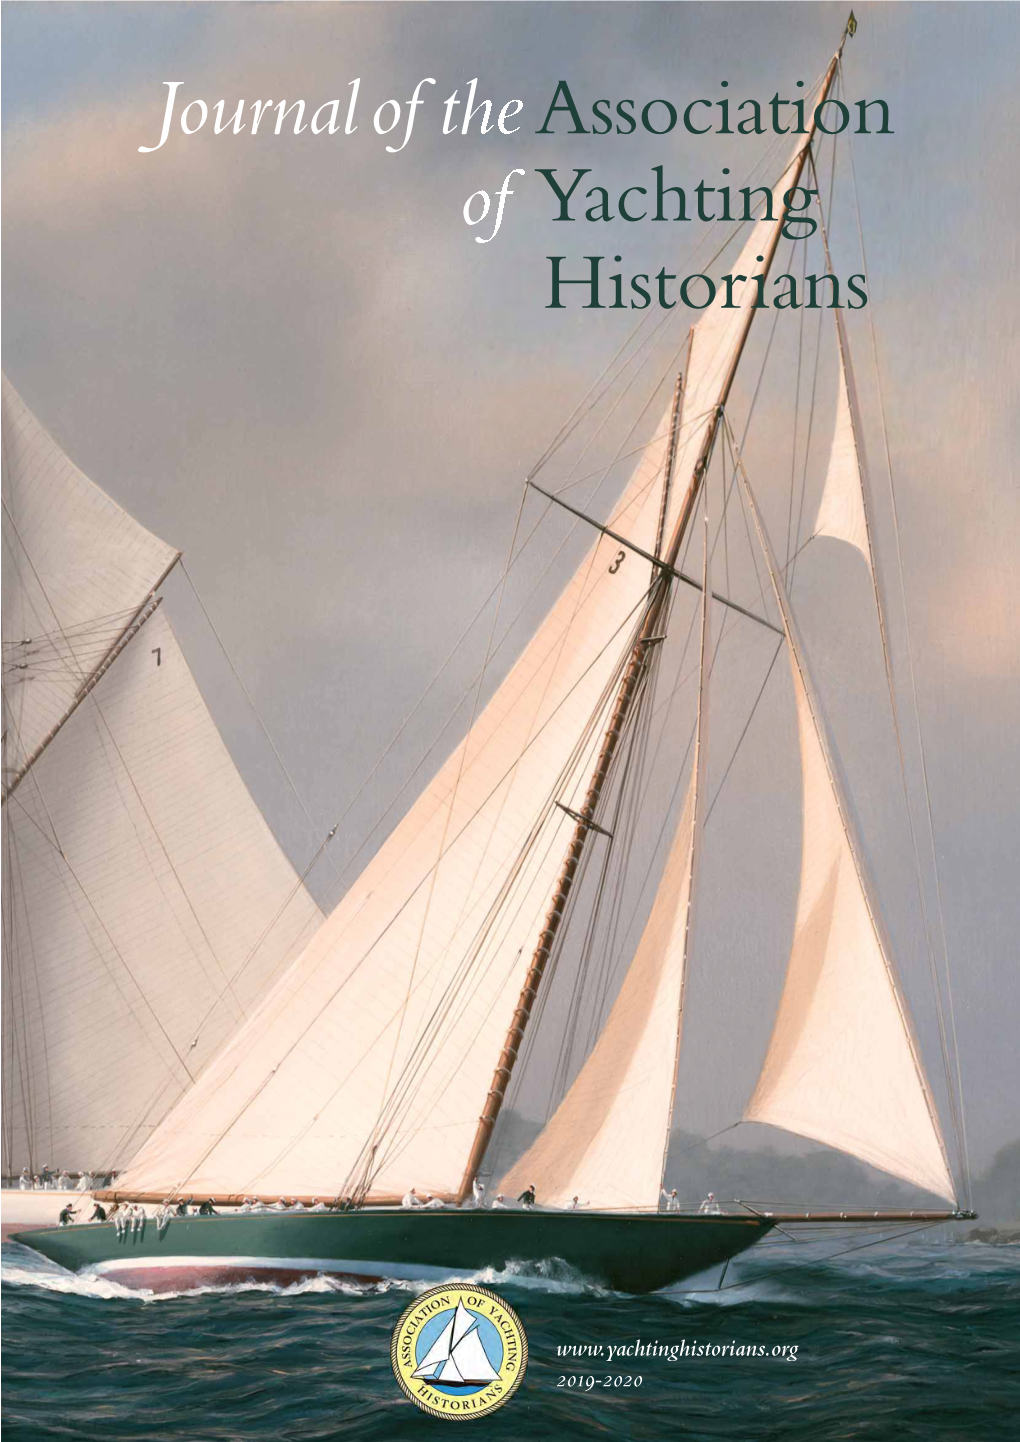 Journal of the of Association Yachting Historians